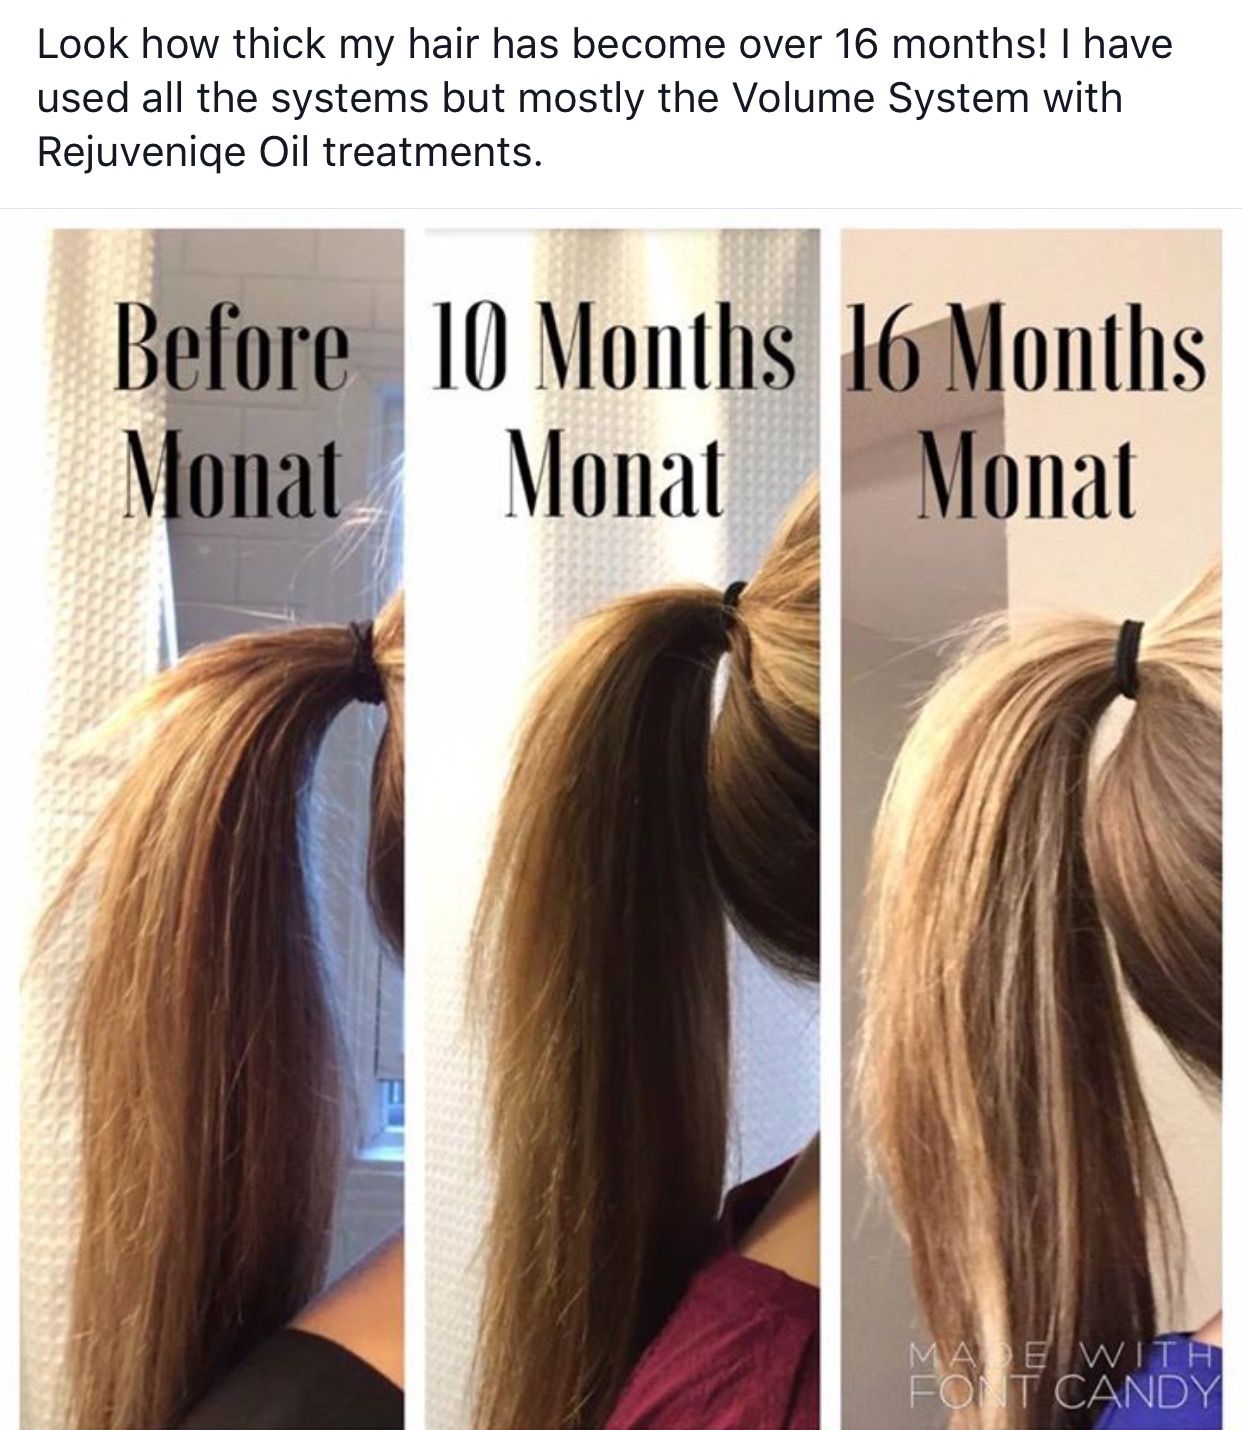 Want thicker hair??? Monat is amazing. All natural and guaranteed ...